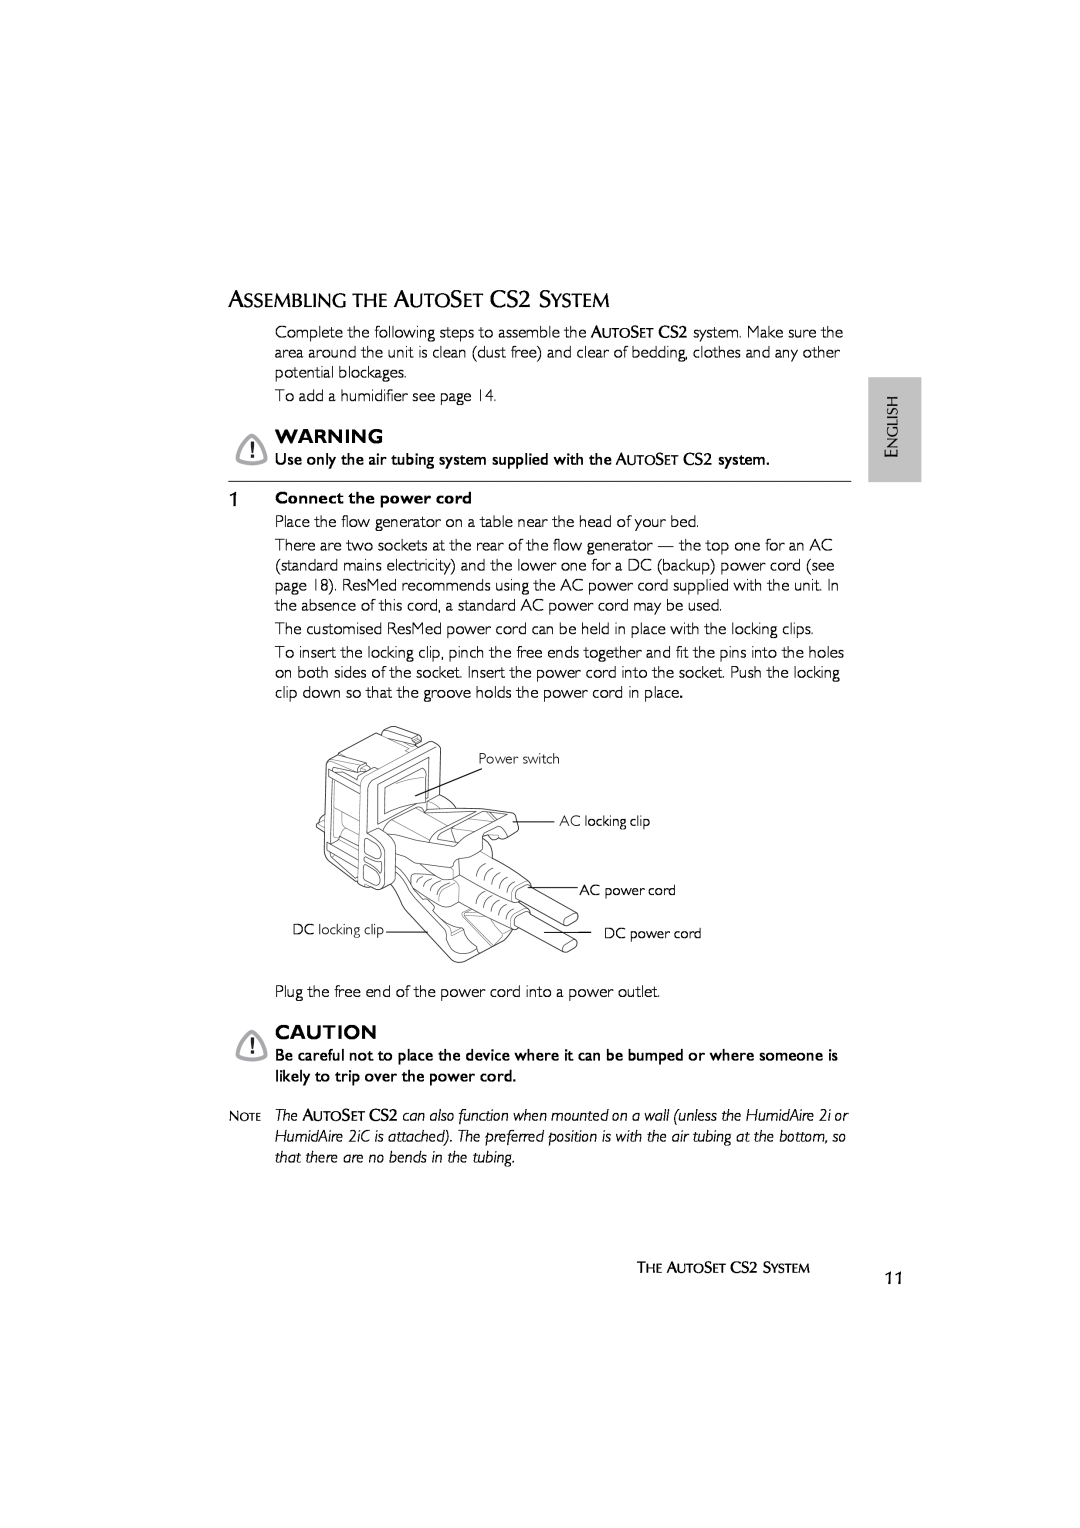 ResMed AutoSet CS 2 user manual ASSEMBLING THE AUTOSET CS2 SYSTEM, Connect the power cord 